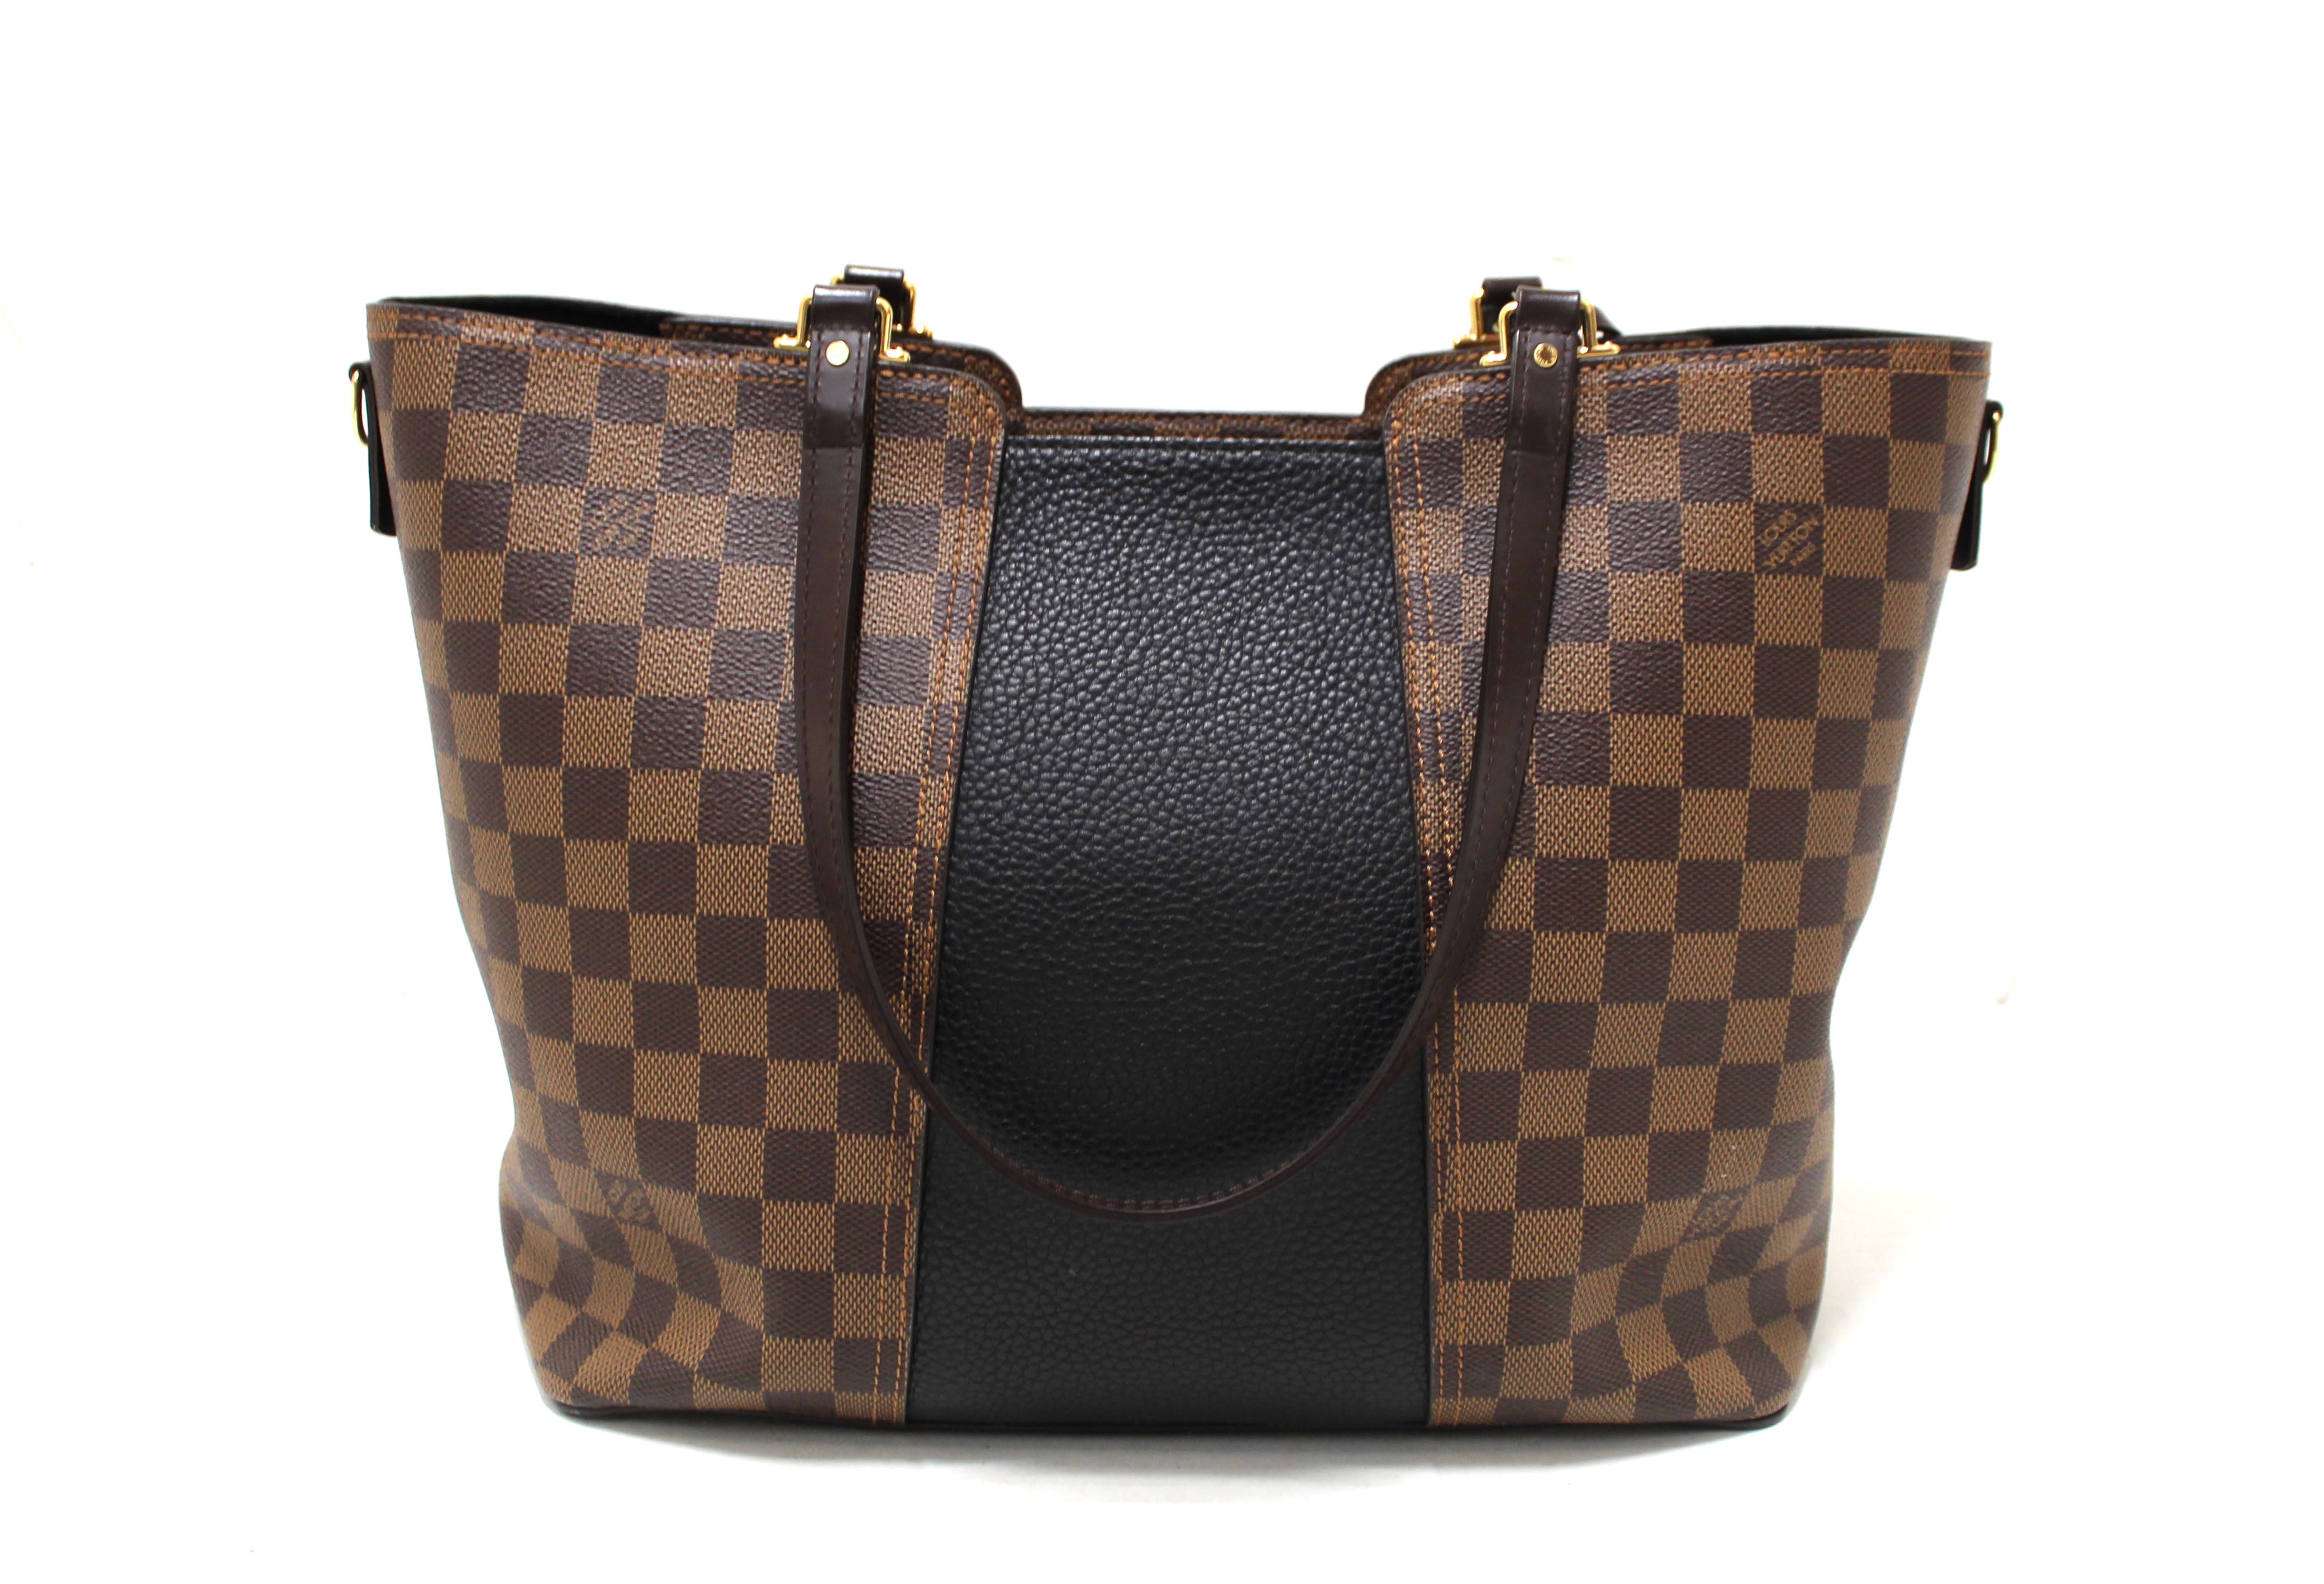 Authentic Louis Vuitton Damier Ebene with Black Leather Jersey